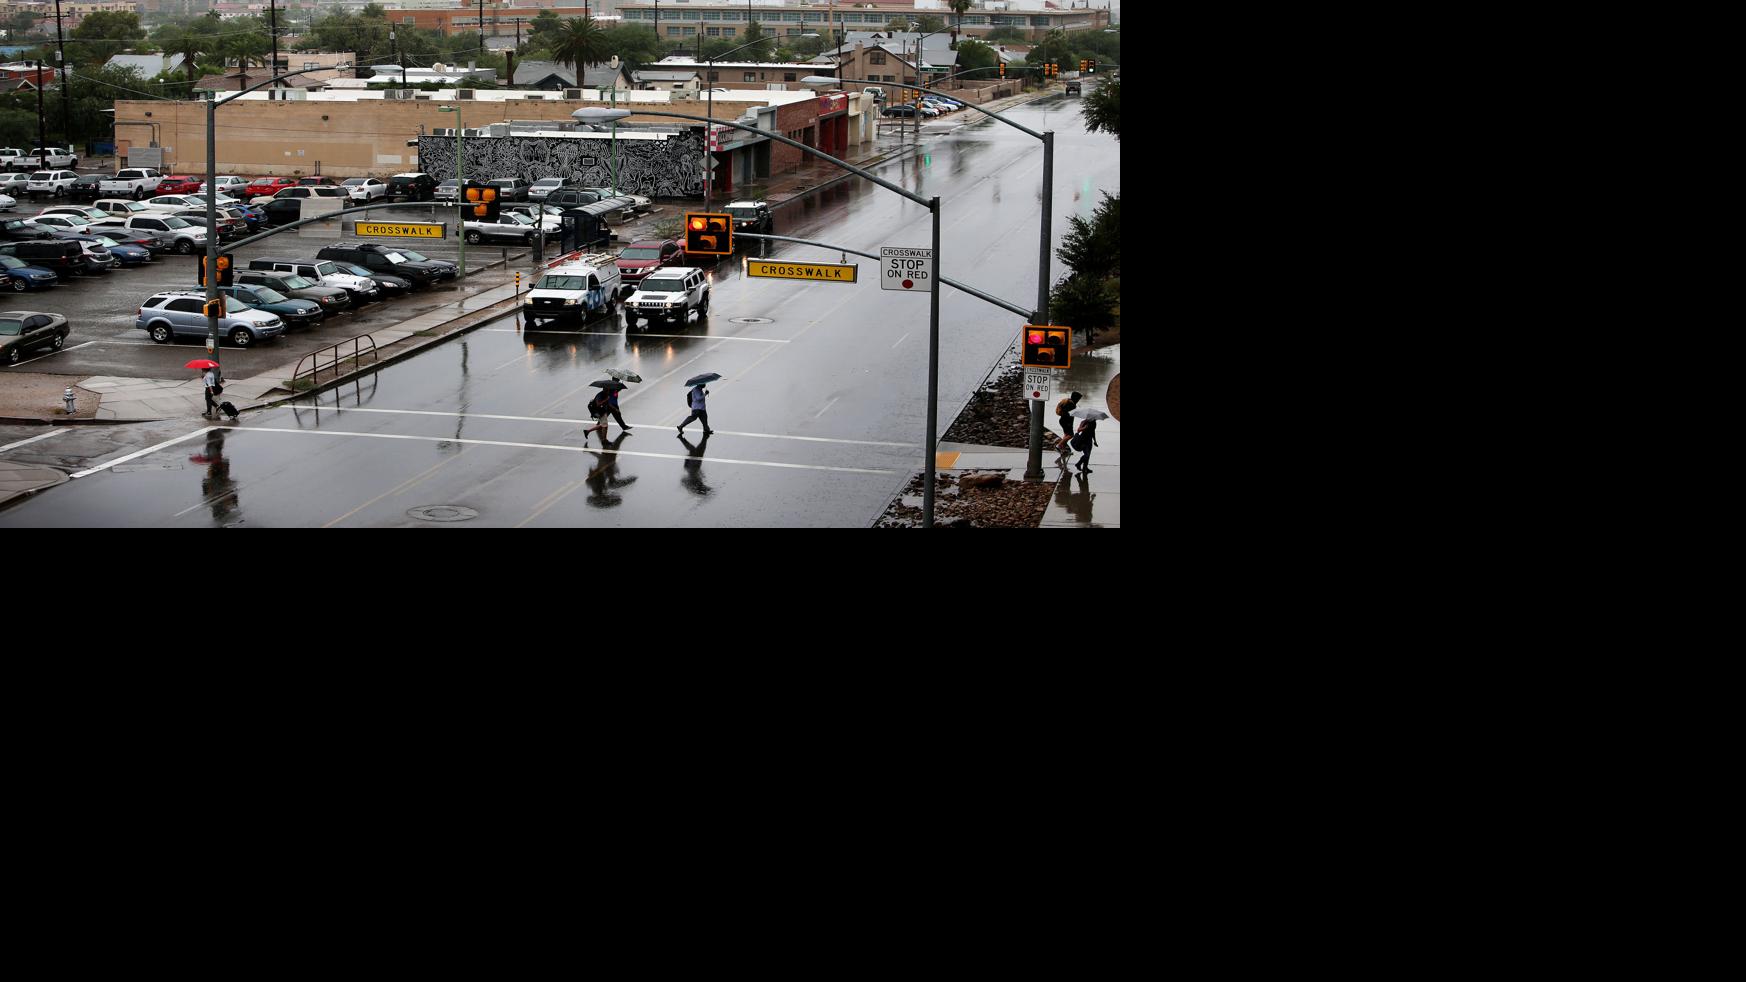 Tucsonarea rainfall totals range from 1 to 3 inches